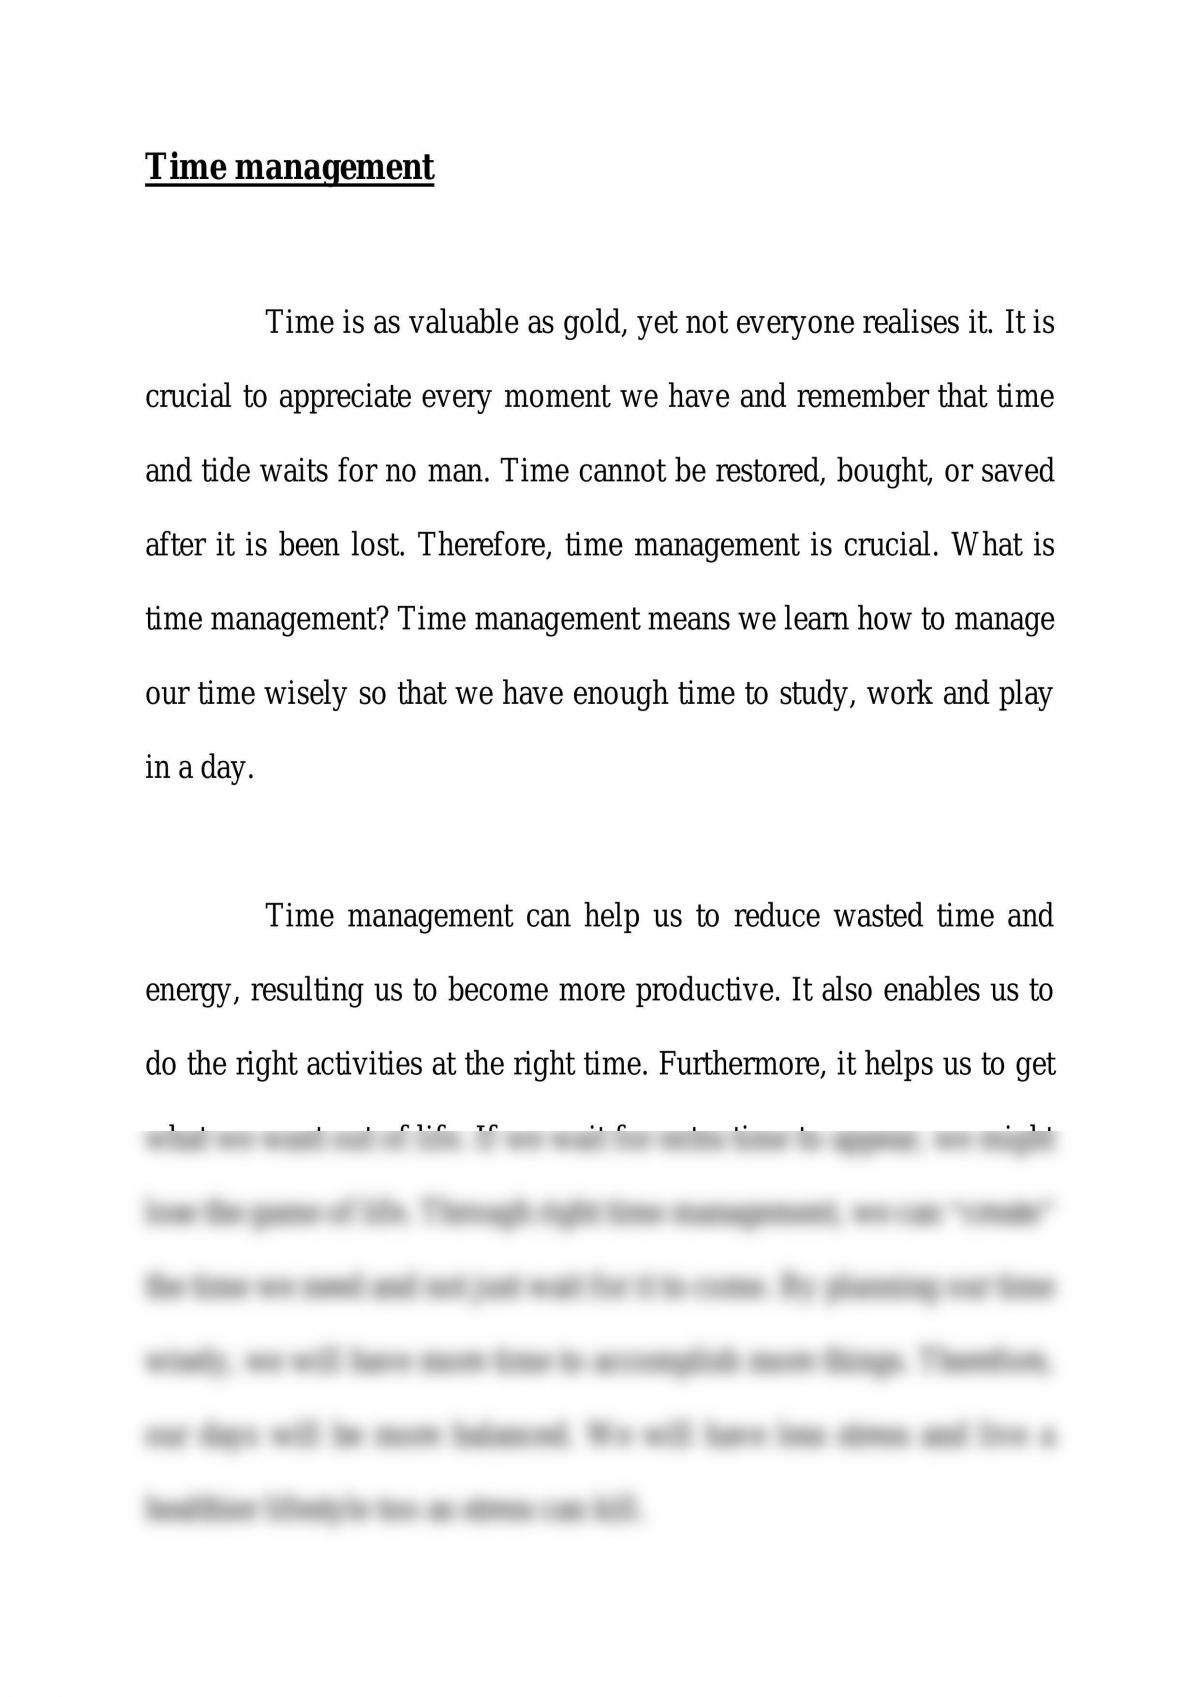 good essay titles about time management